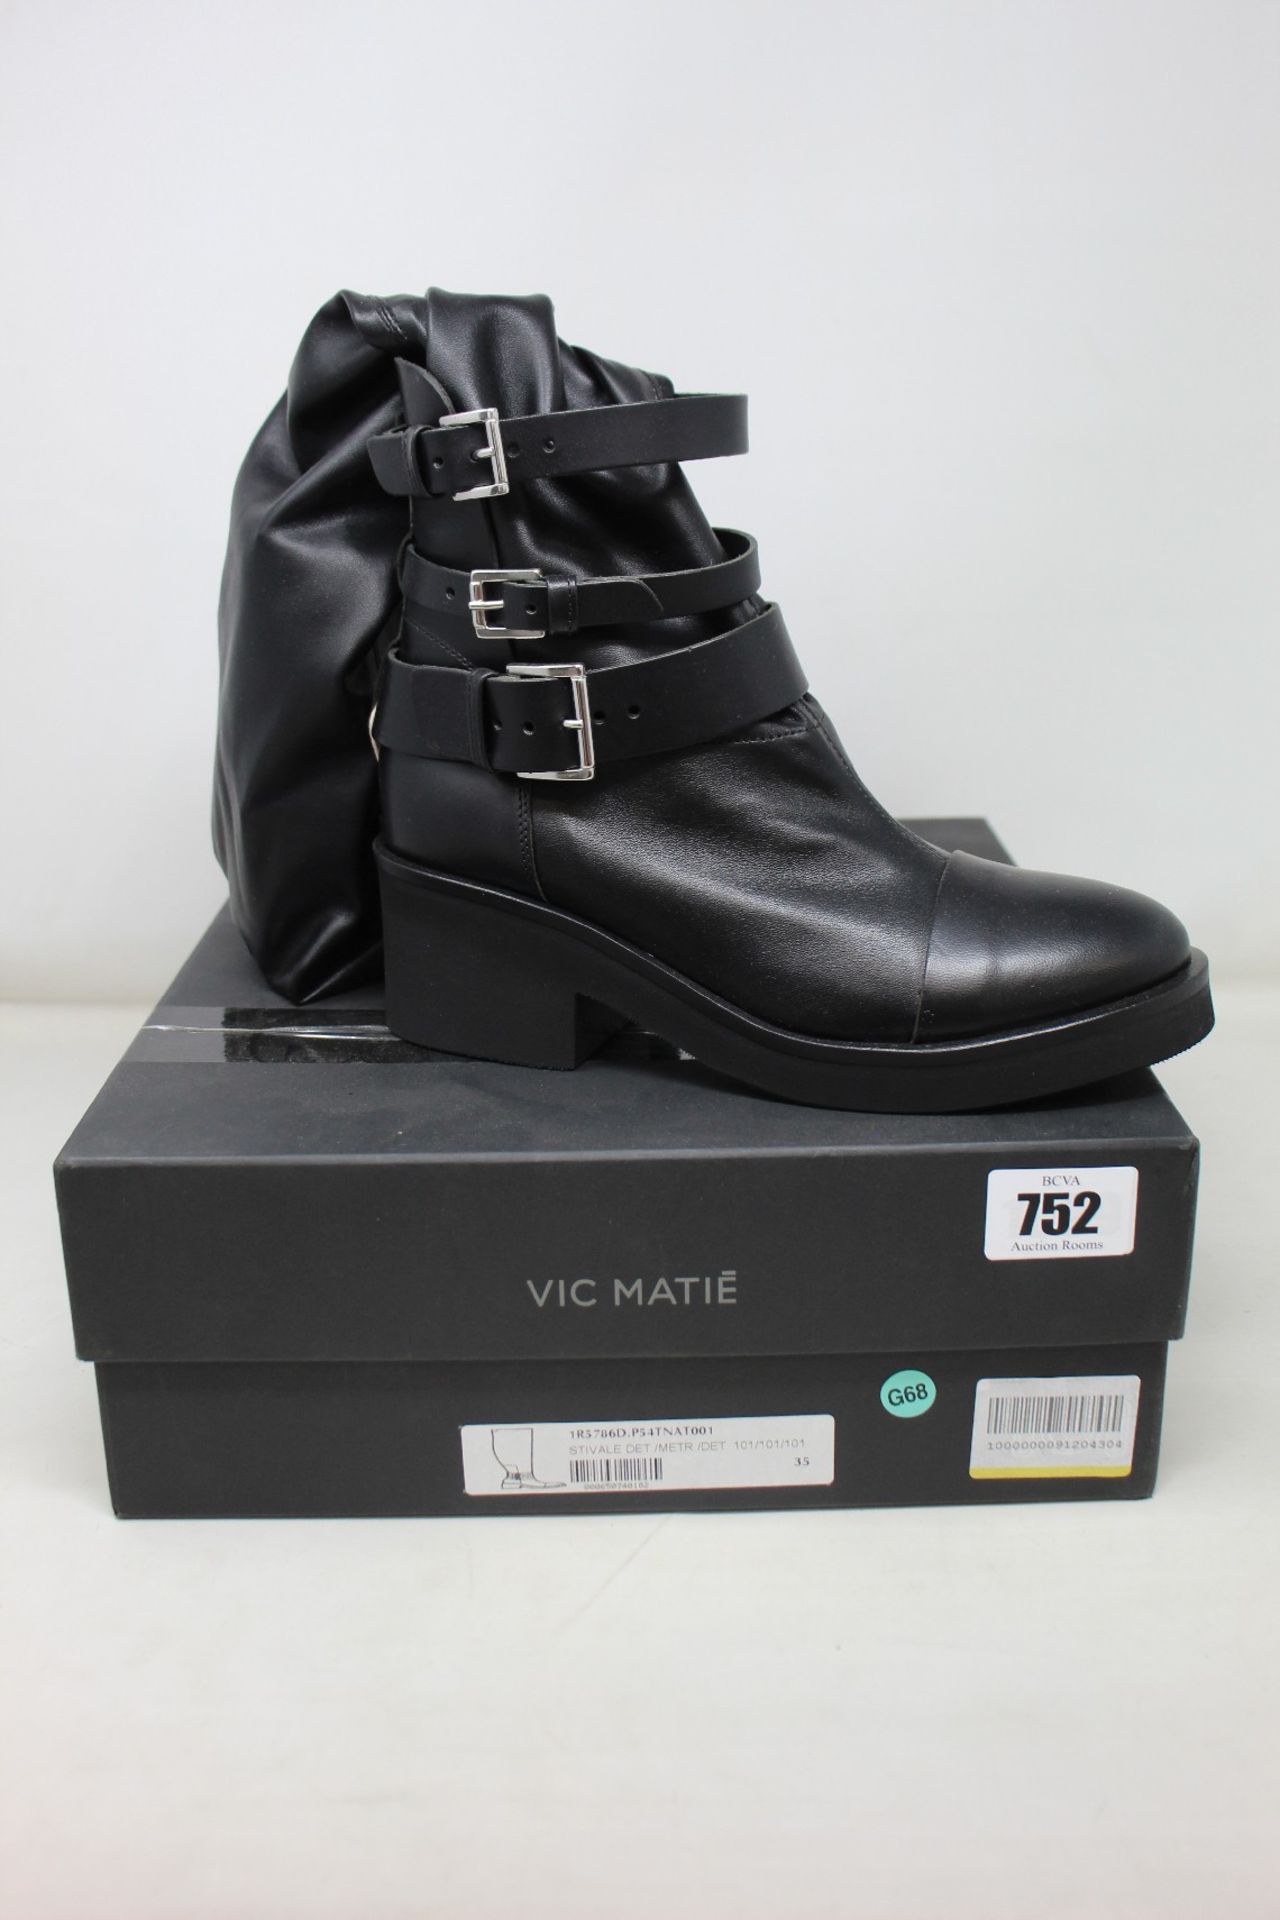 A pair of as new Vic Matie boots (EU 35).